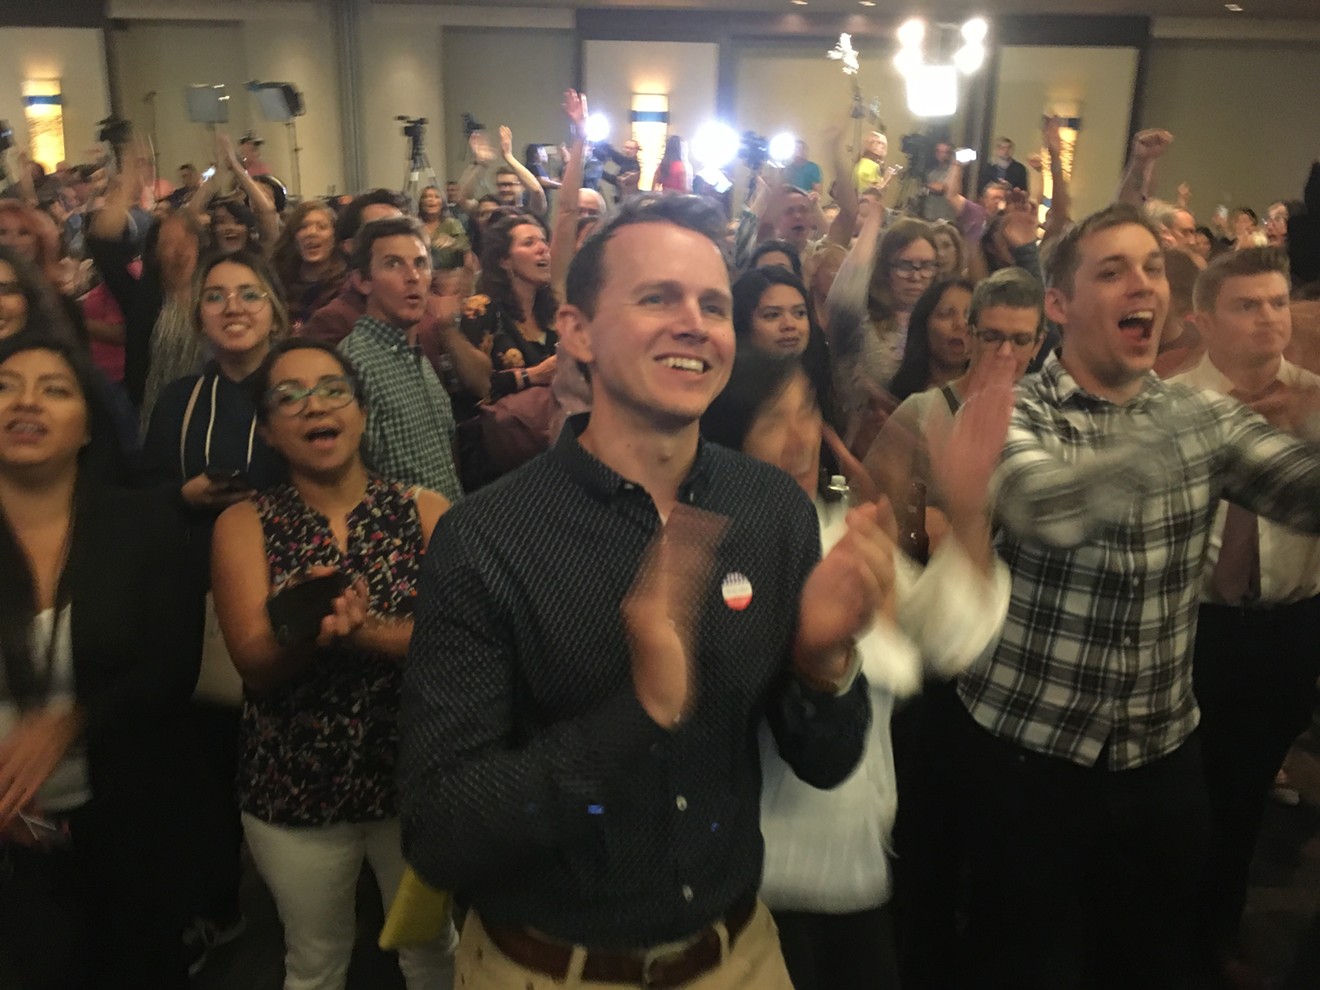 Democrats celebrate in Phoenix when it's announced they regained control of the U.S. House of Representatives.